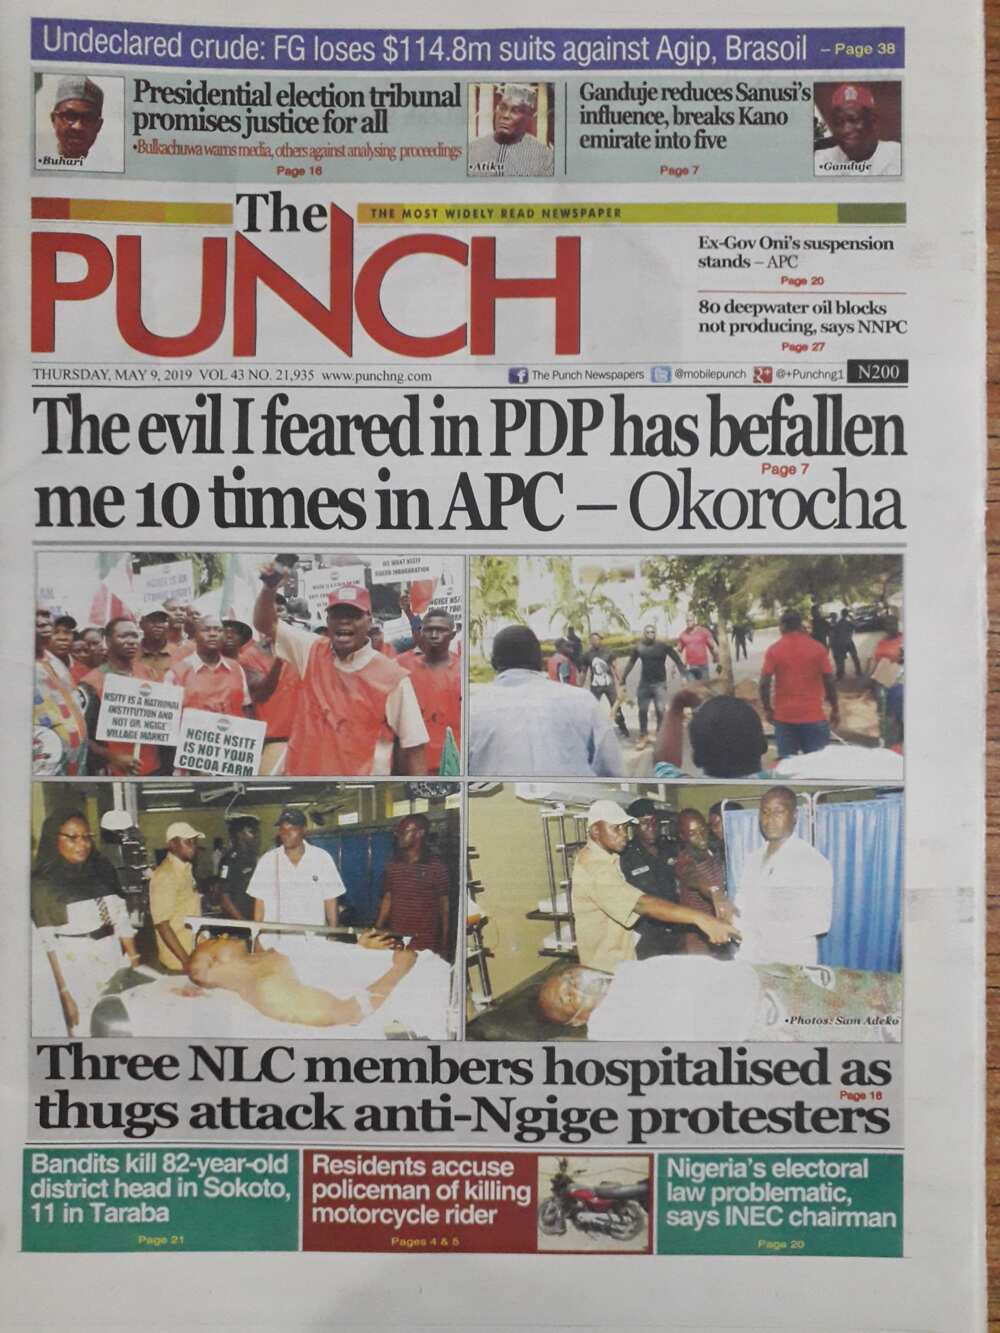 The Punch newspaper of May 9